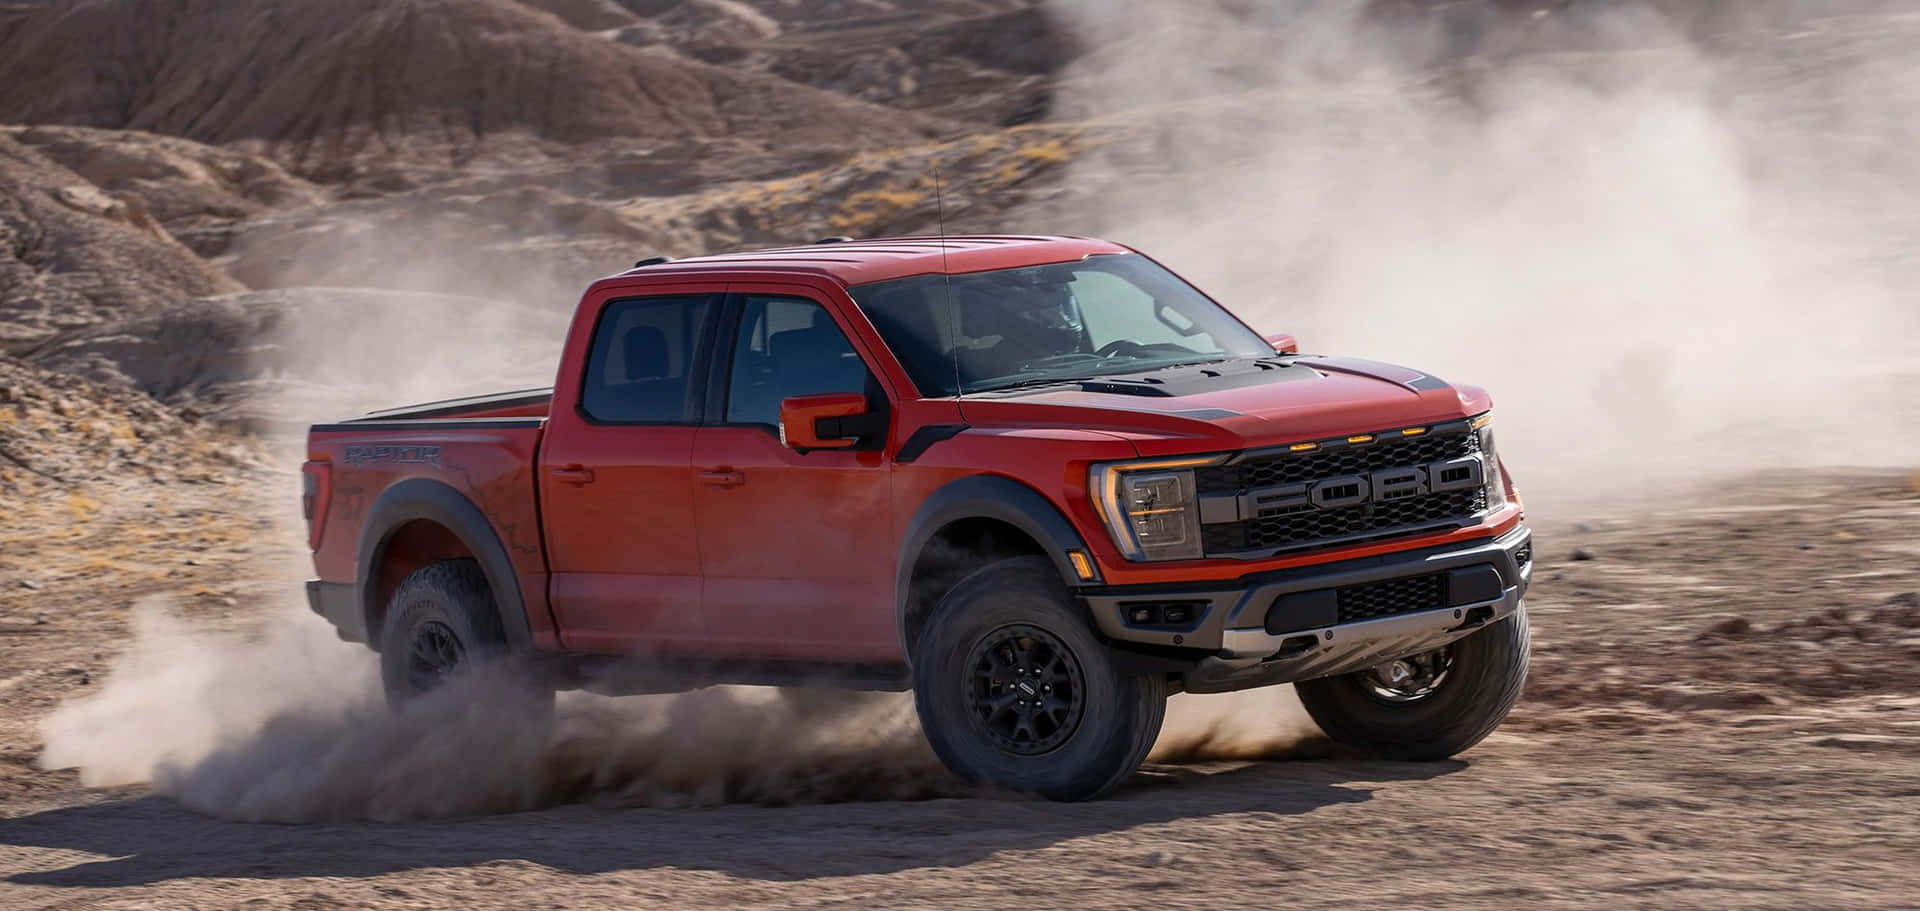 The Red 2019 Ford F-150 Rambo Is Driving Through The Desert Background